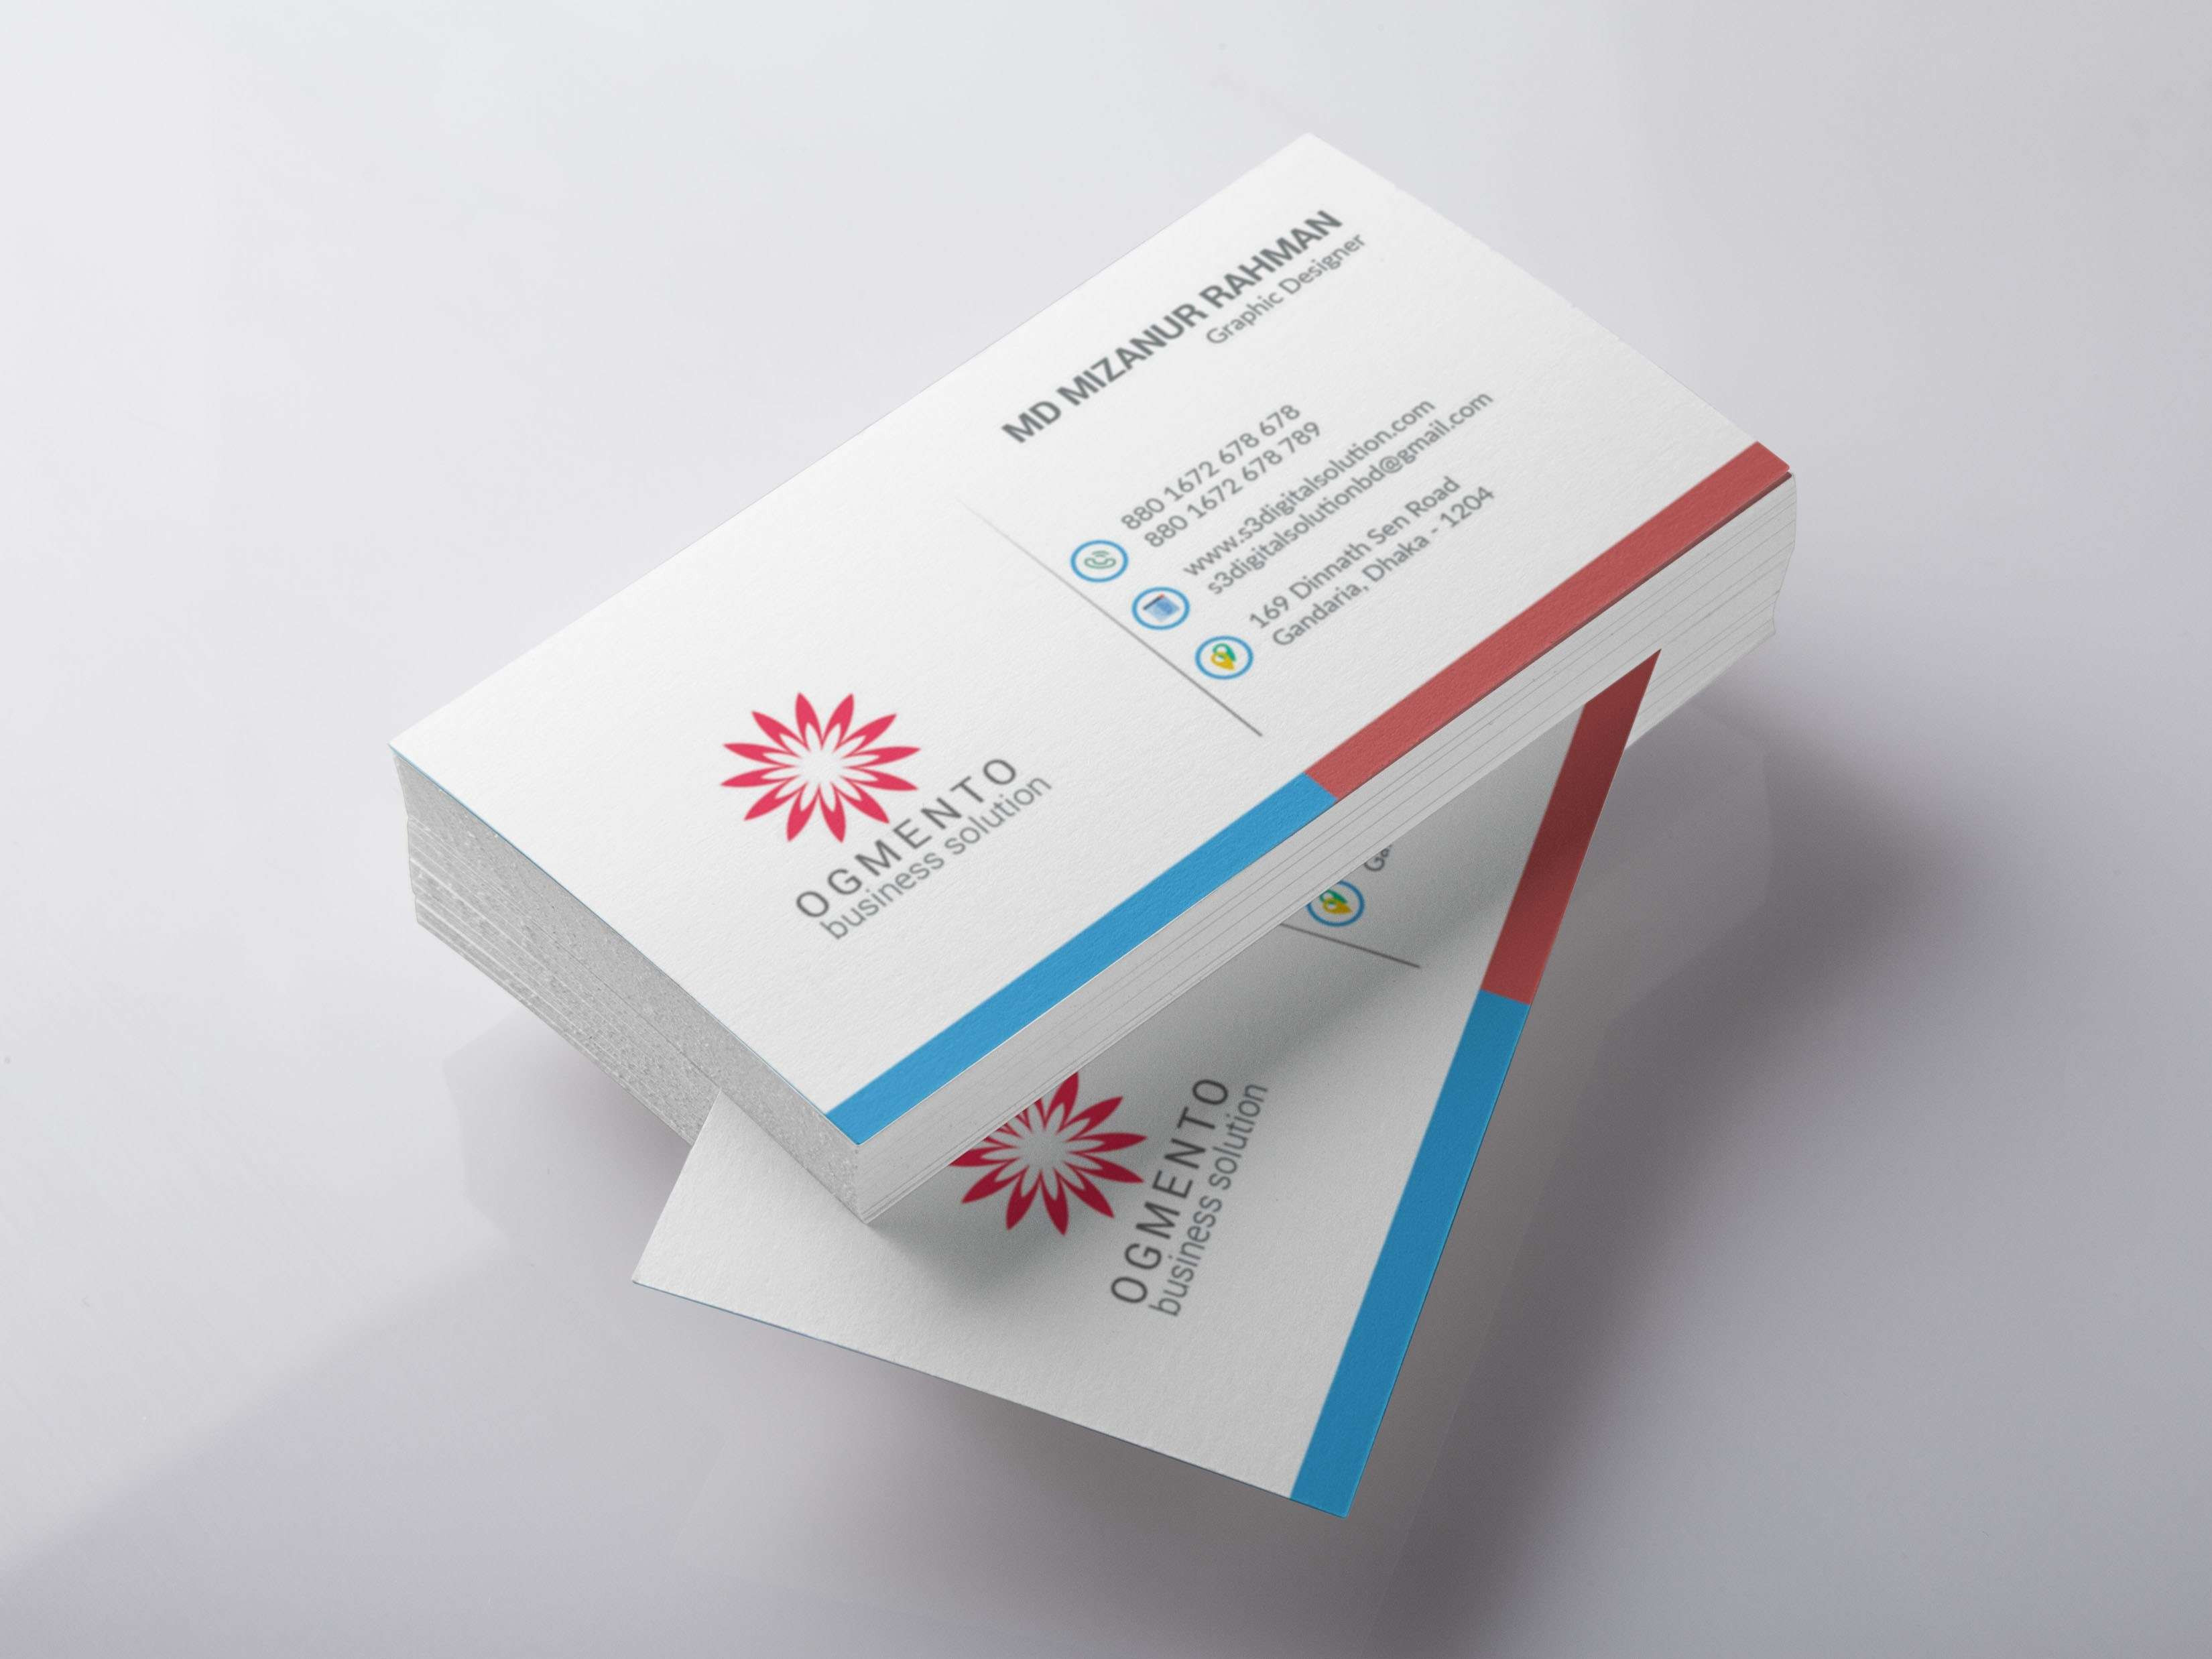 2 Sided Business Cards Templates Free apocalomegaproductions com